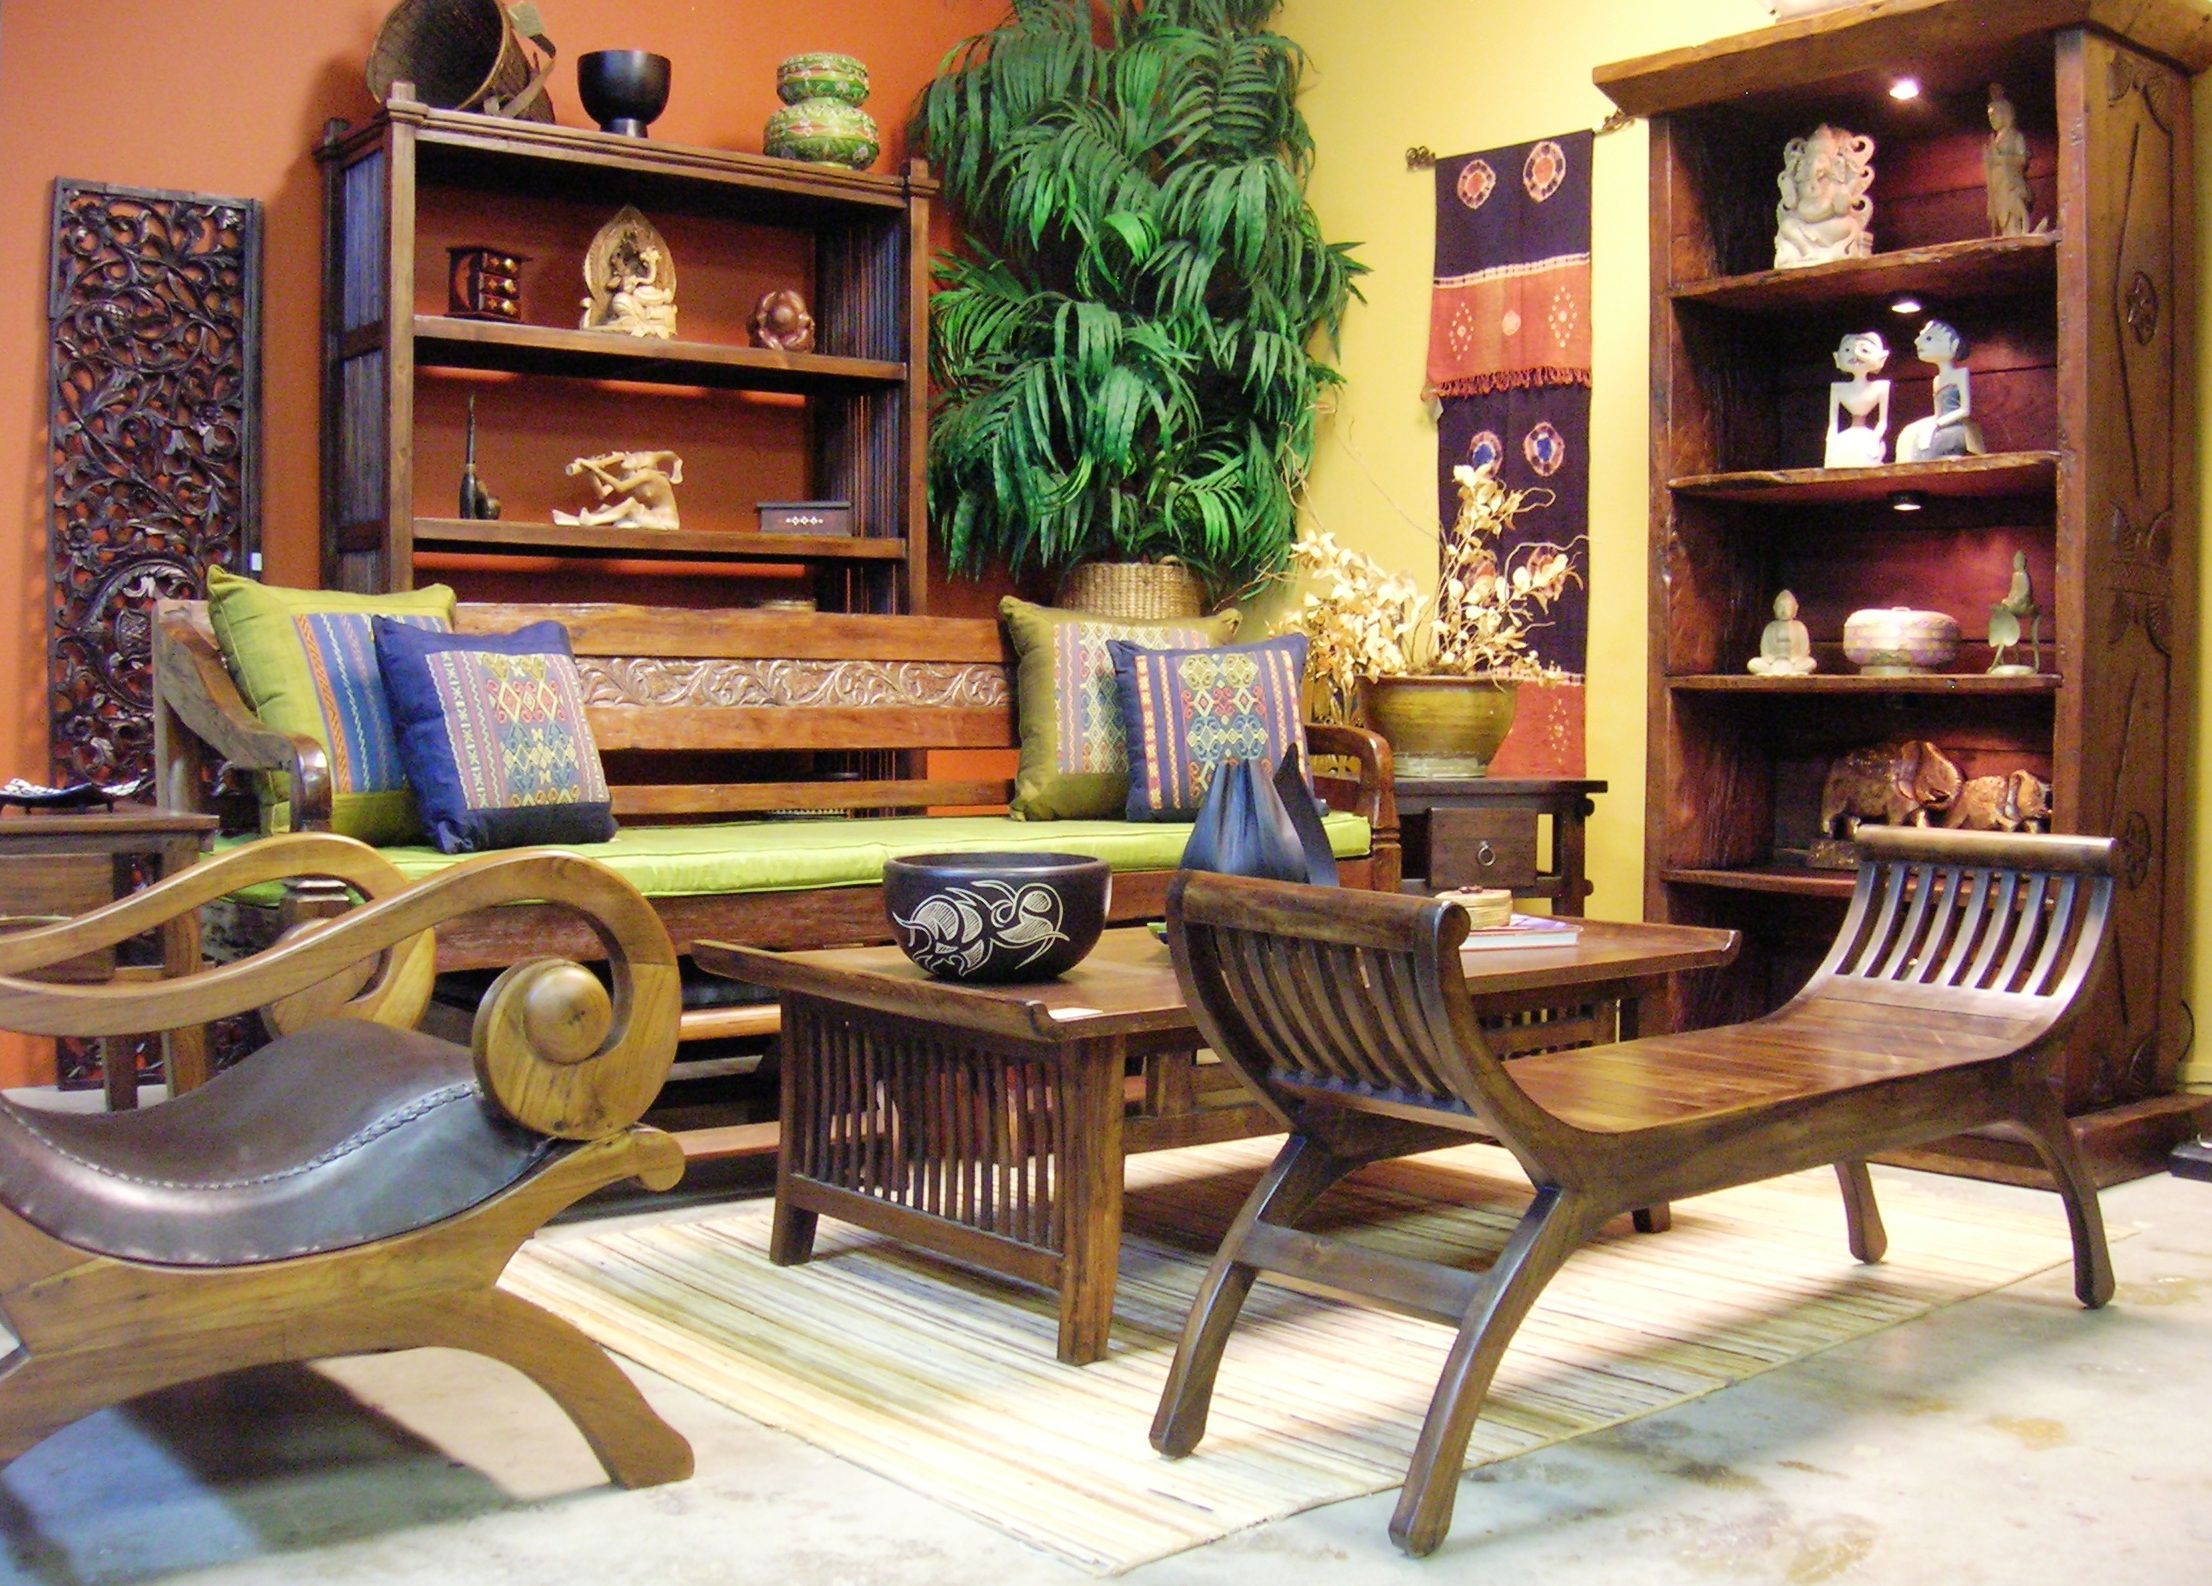 Indonesian Furniture Exporter: Bringing Unique And Artistic Pieces To Your Home